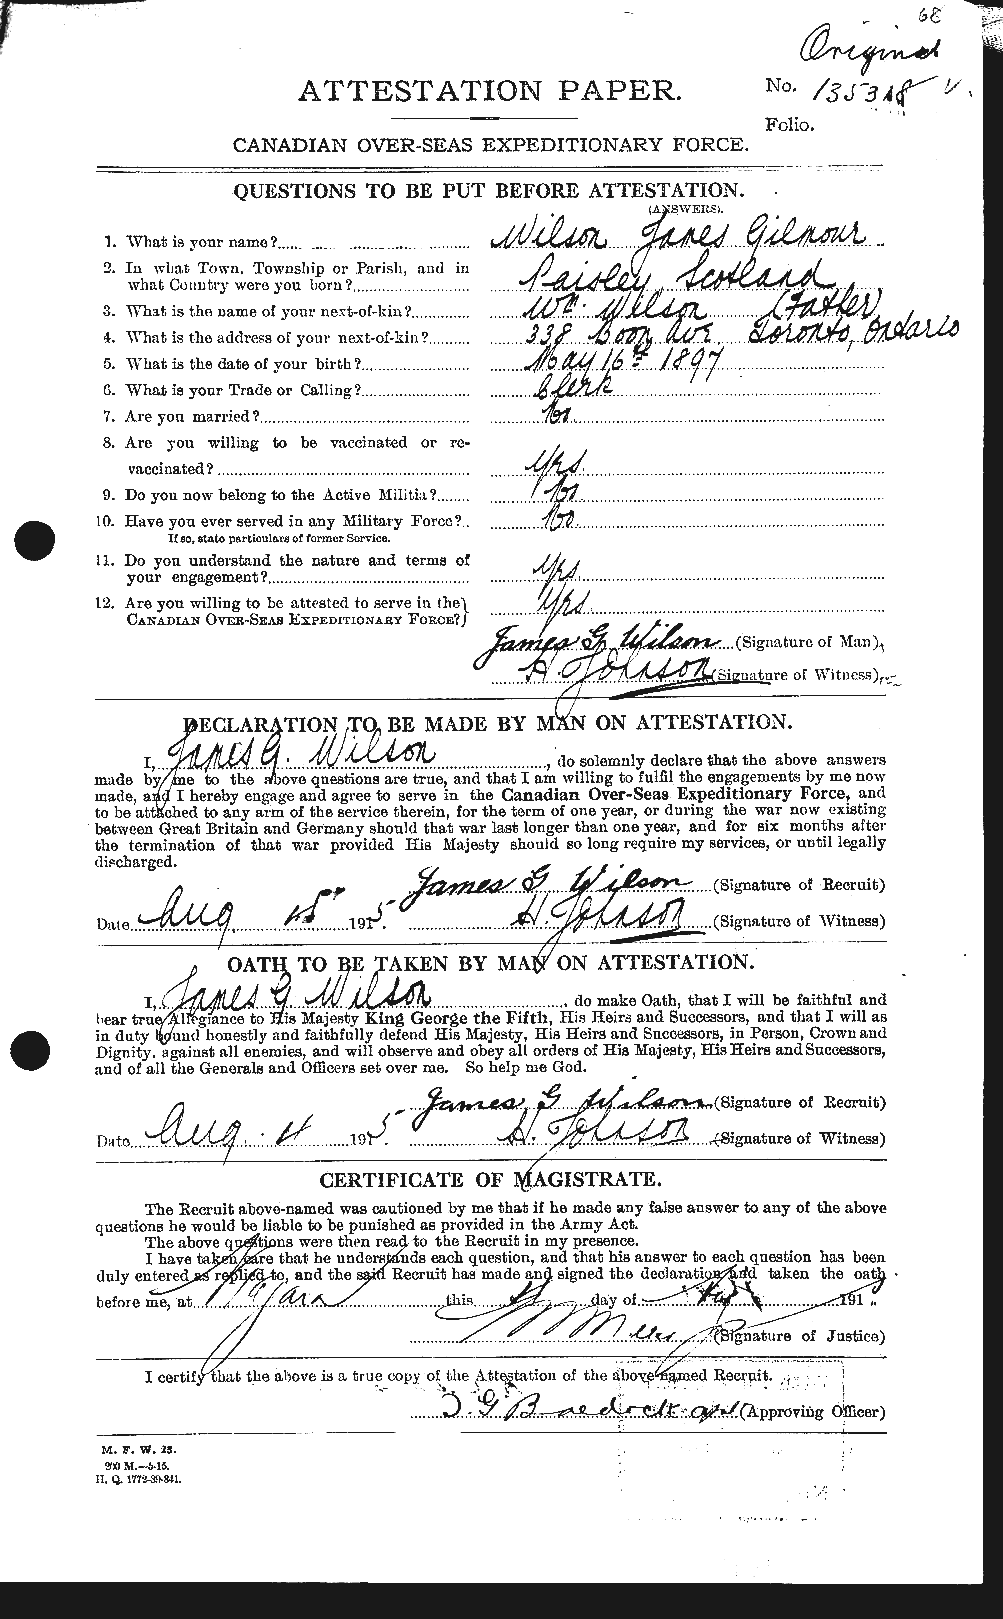 Personnel Records of the First World War - CEF 681459a